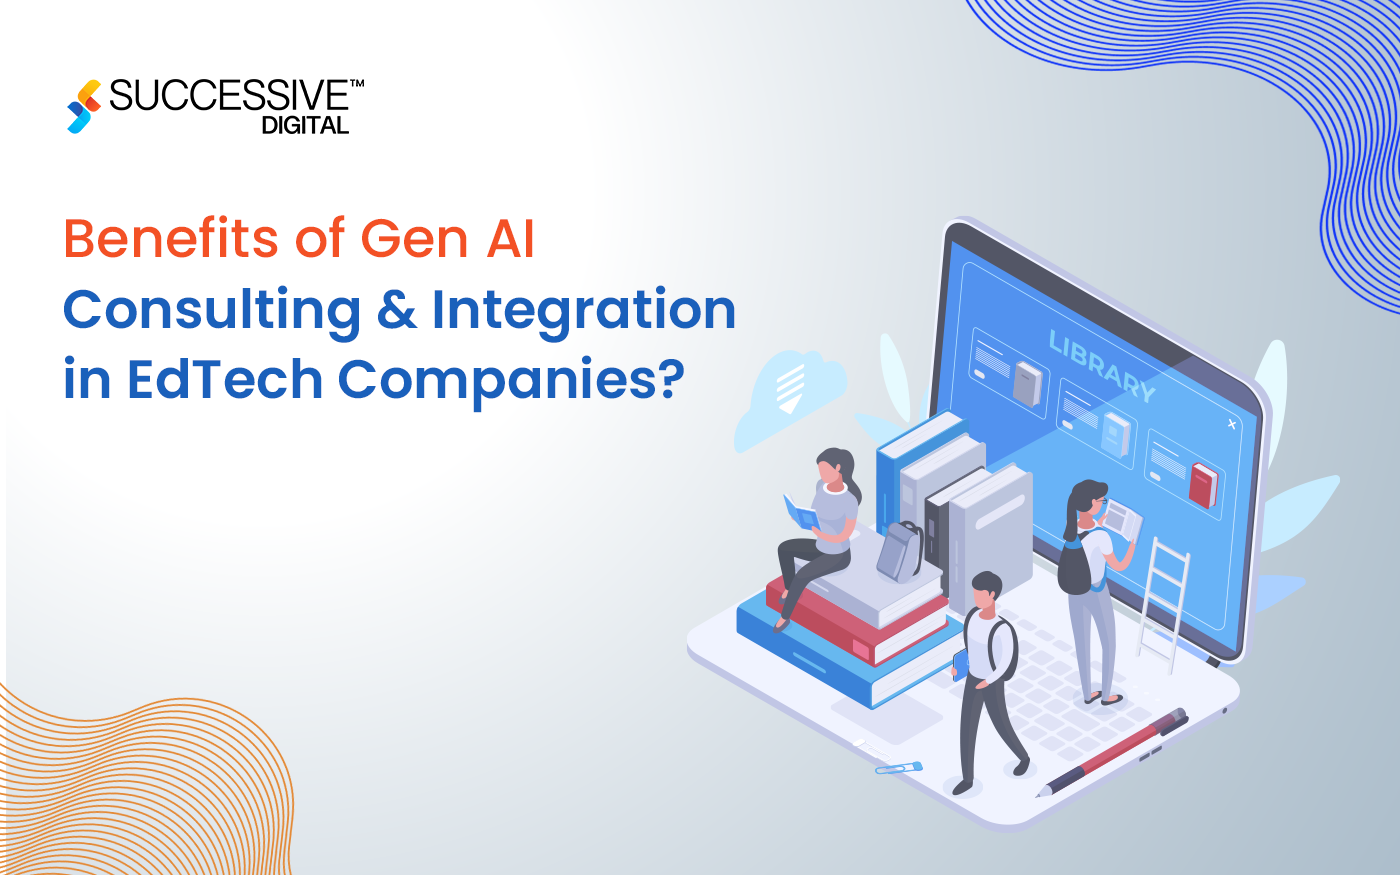 Benefits of Gen AI Consulting & Integration in EdTech Companies?